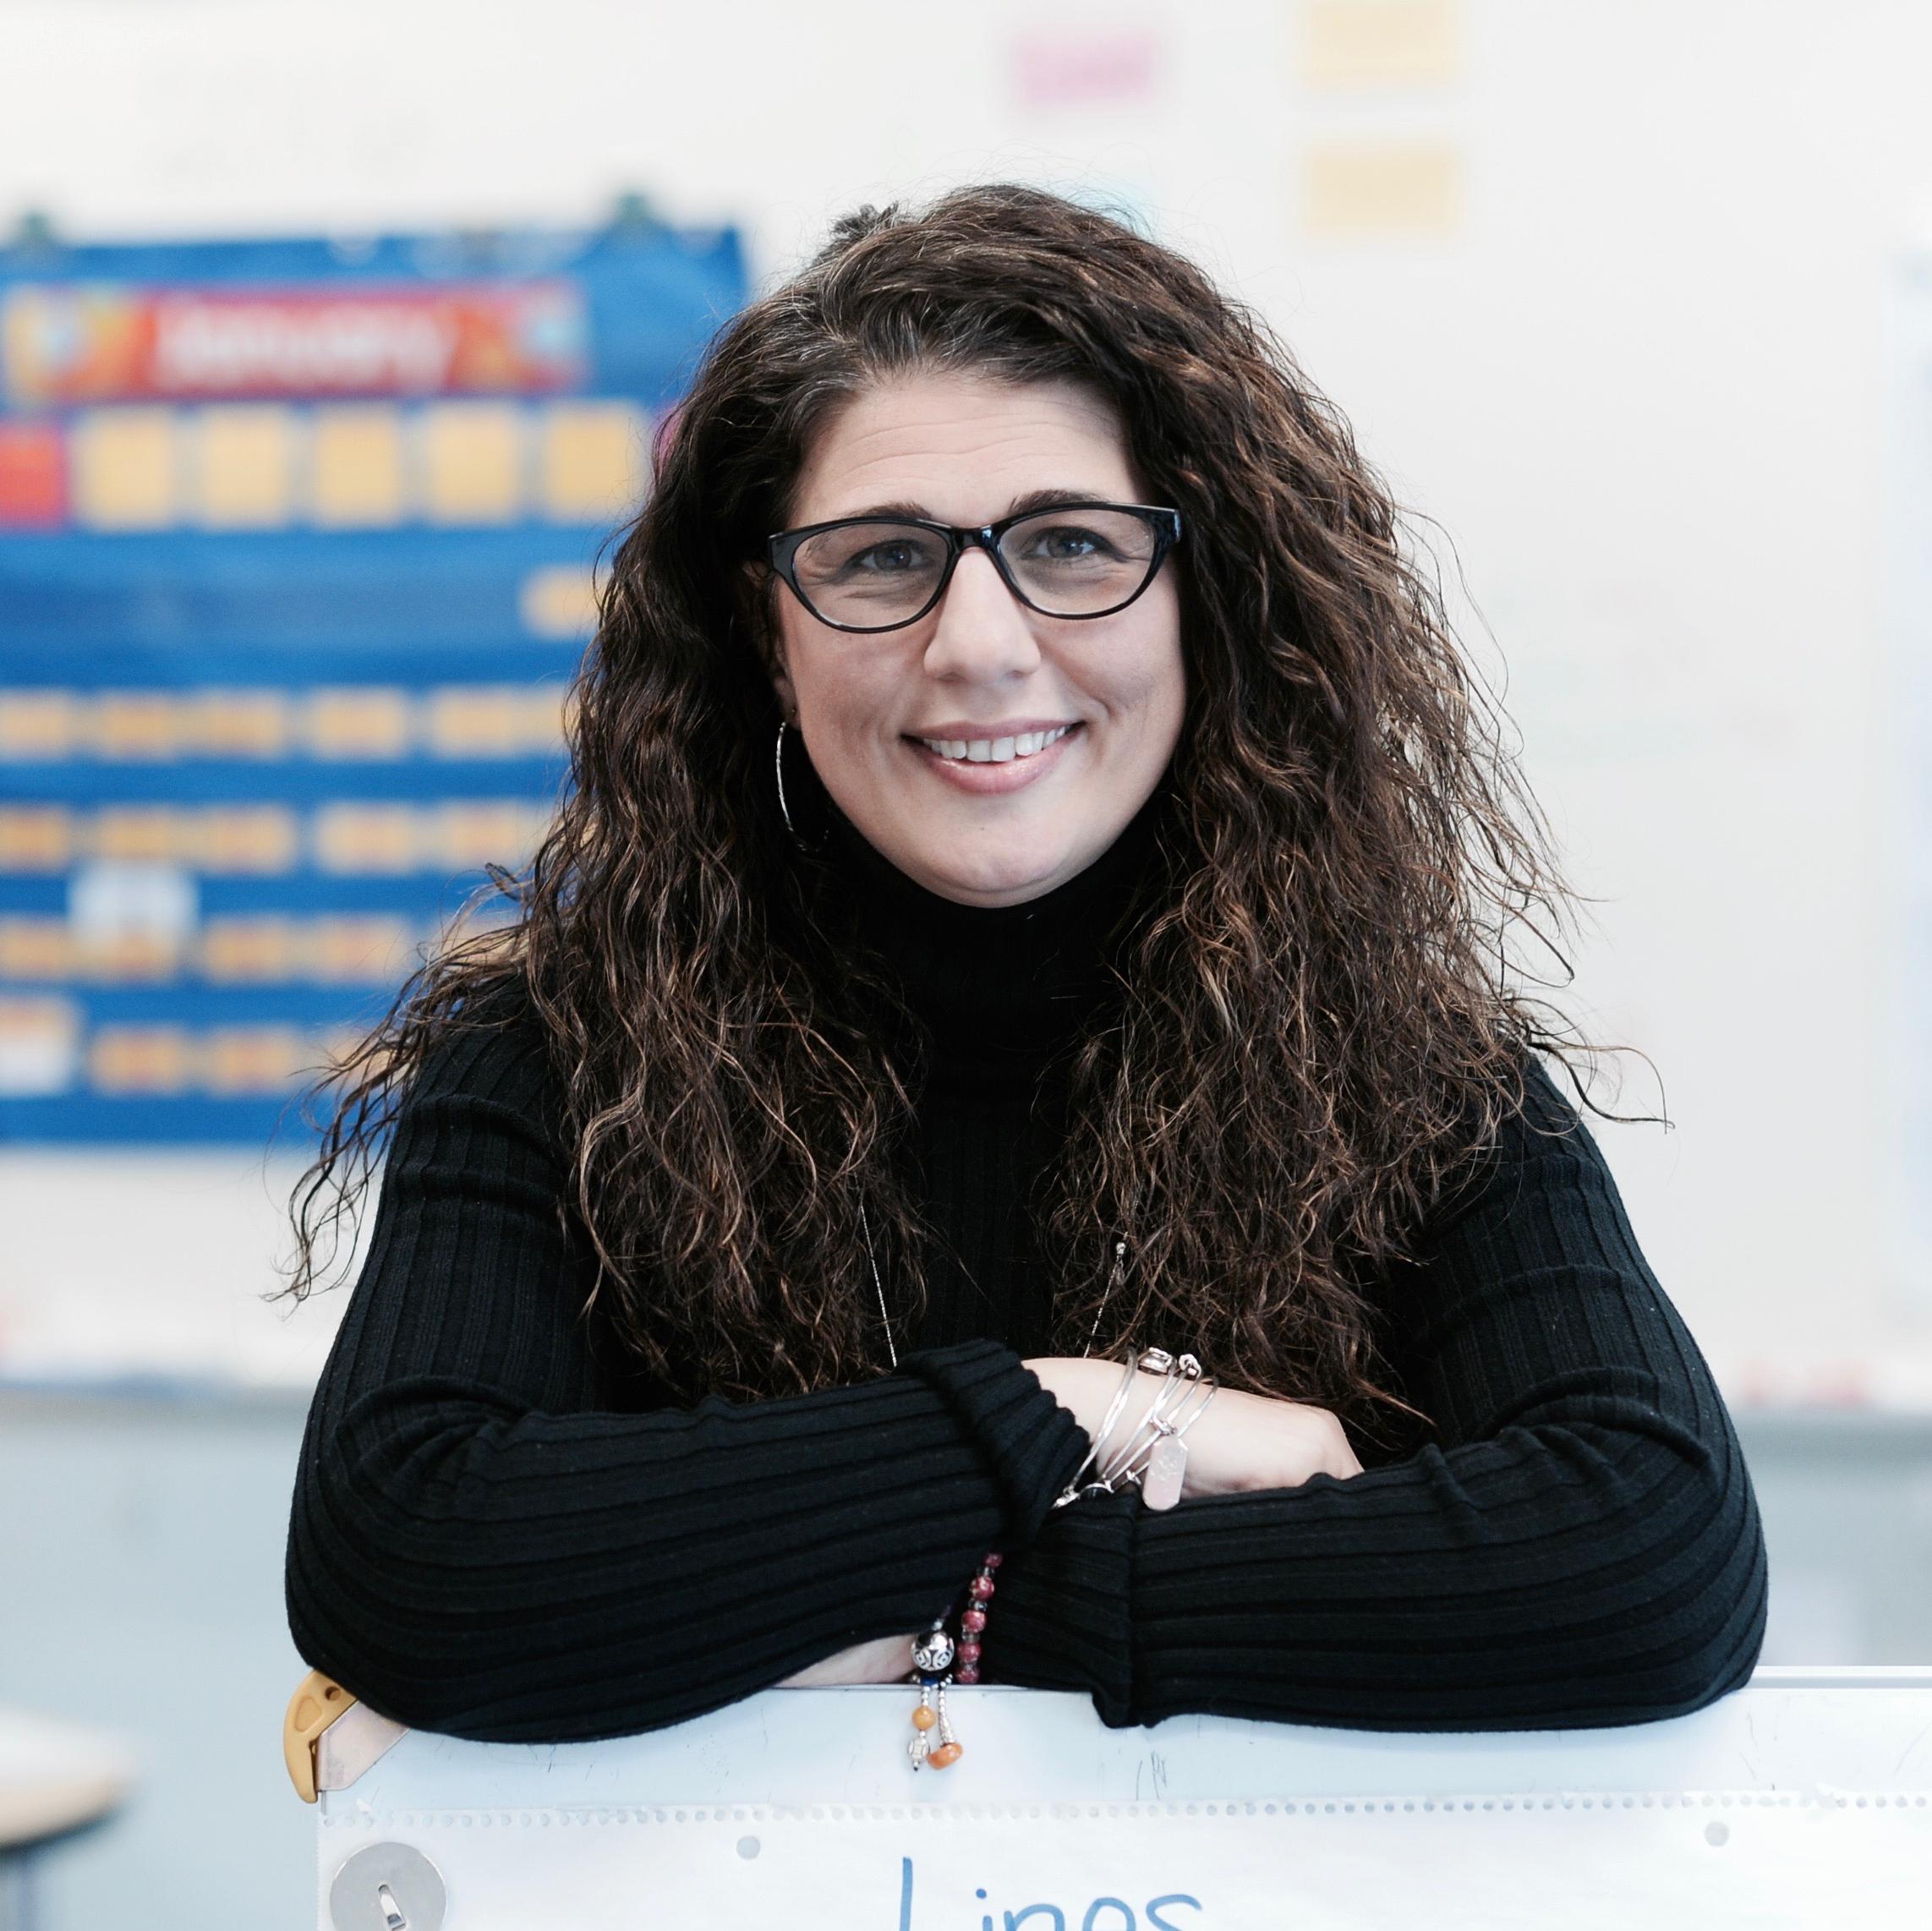 NYSCAS and GSE alum Angela LaVeglia is now working as a special-education teacher for the fourth grade class at P.S. 307 in Queens.